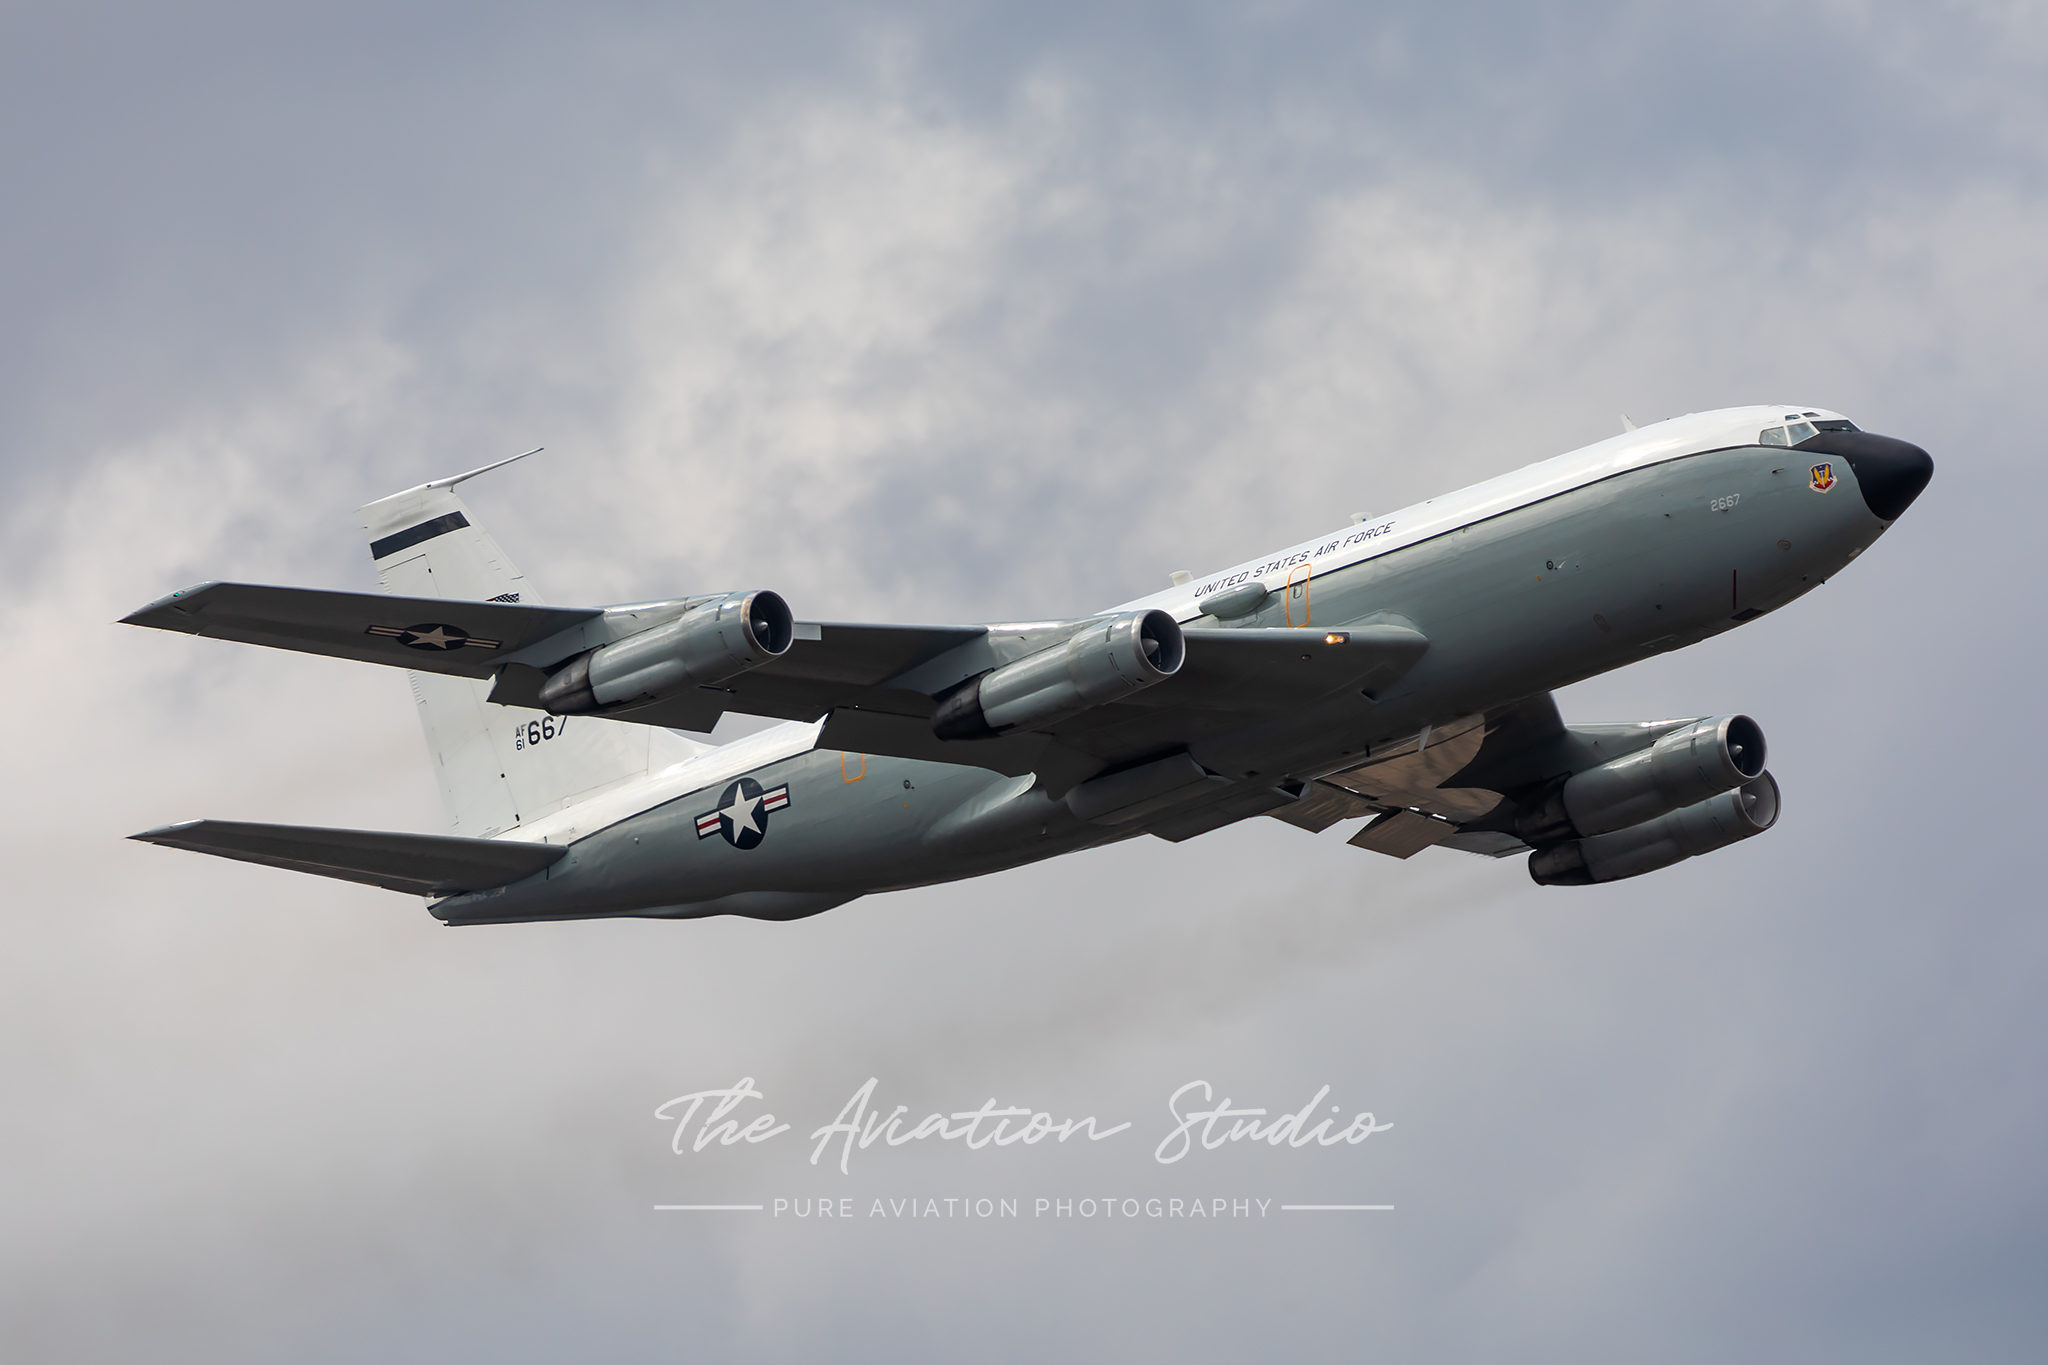 United States Air Force WC-135 61-2667 Constant Phoenix climbing away from RWY15 at RAAF Base Amberley (Image: Lance Broad)